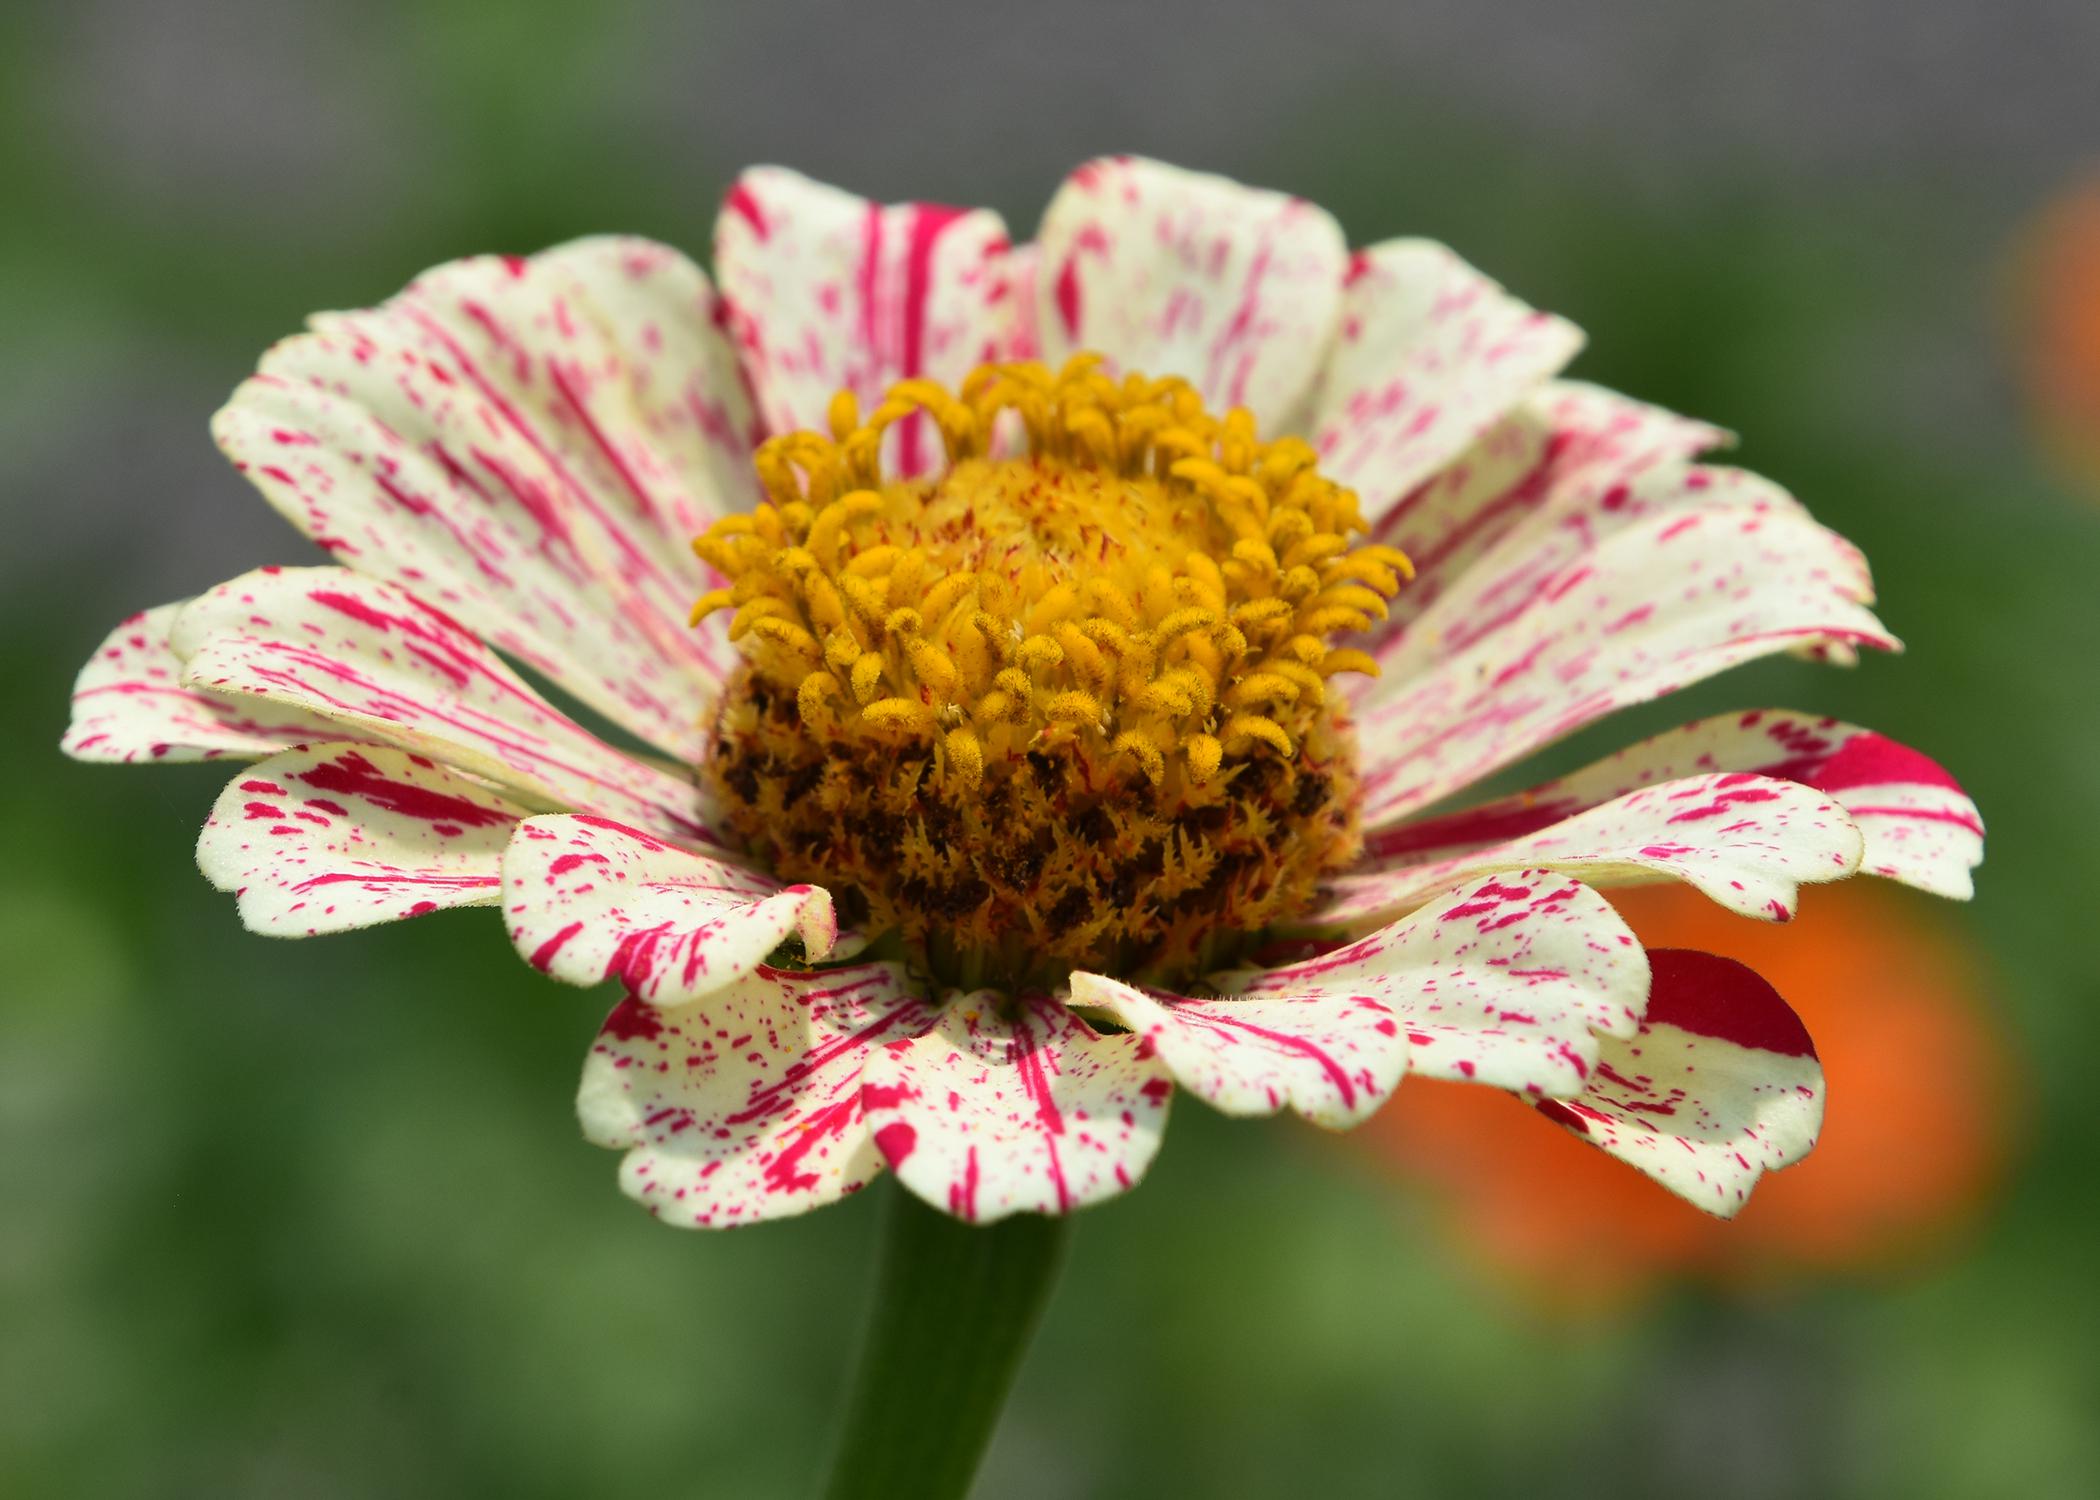 A single bloom has white petals with thin red stripes.